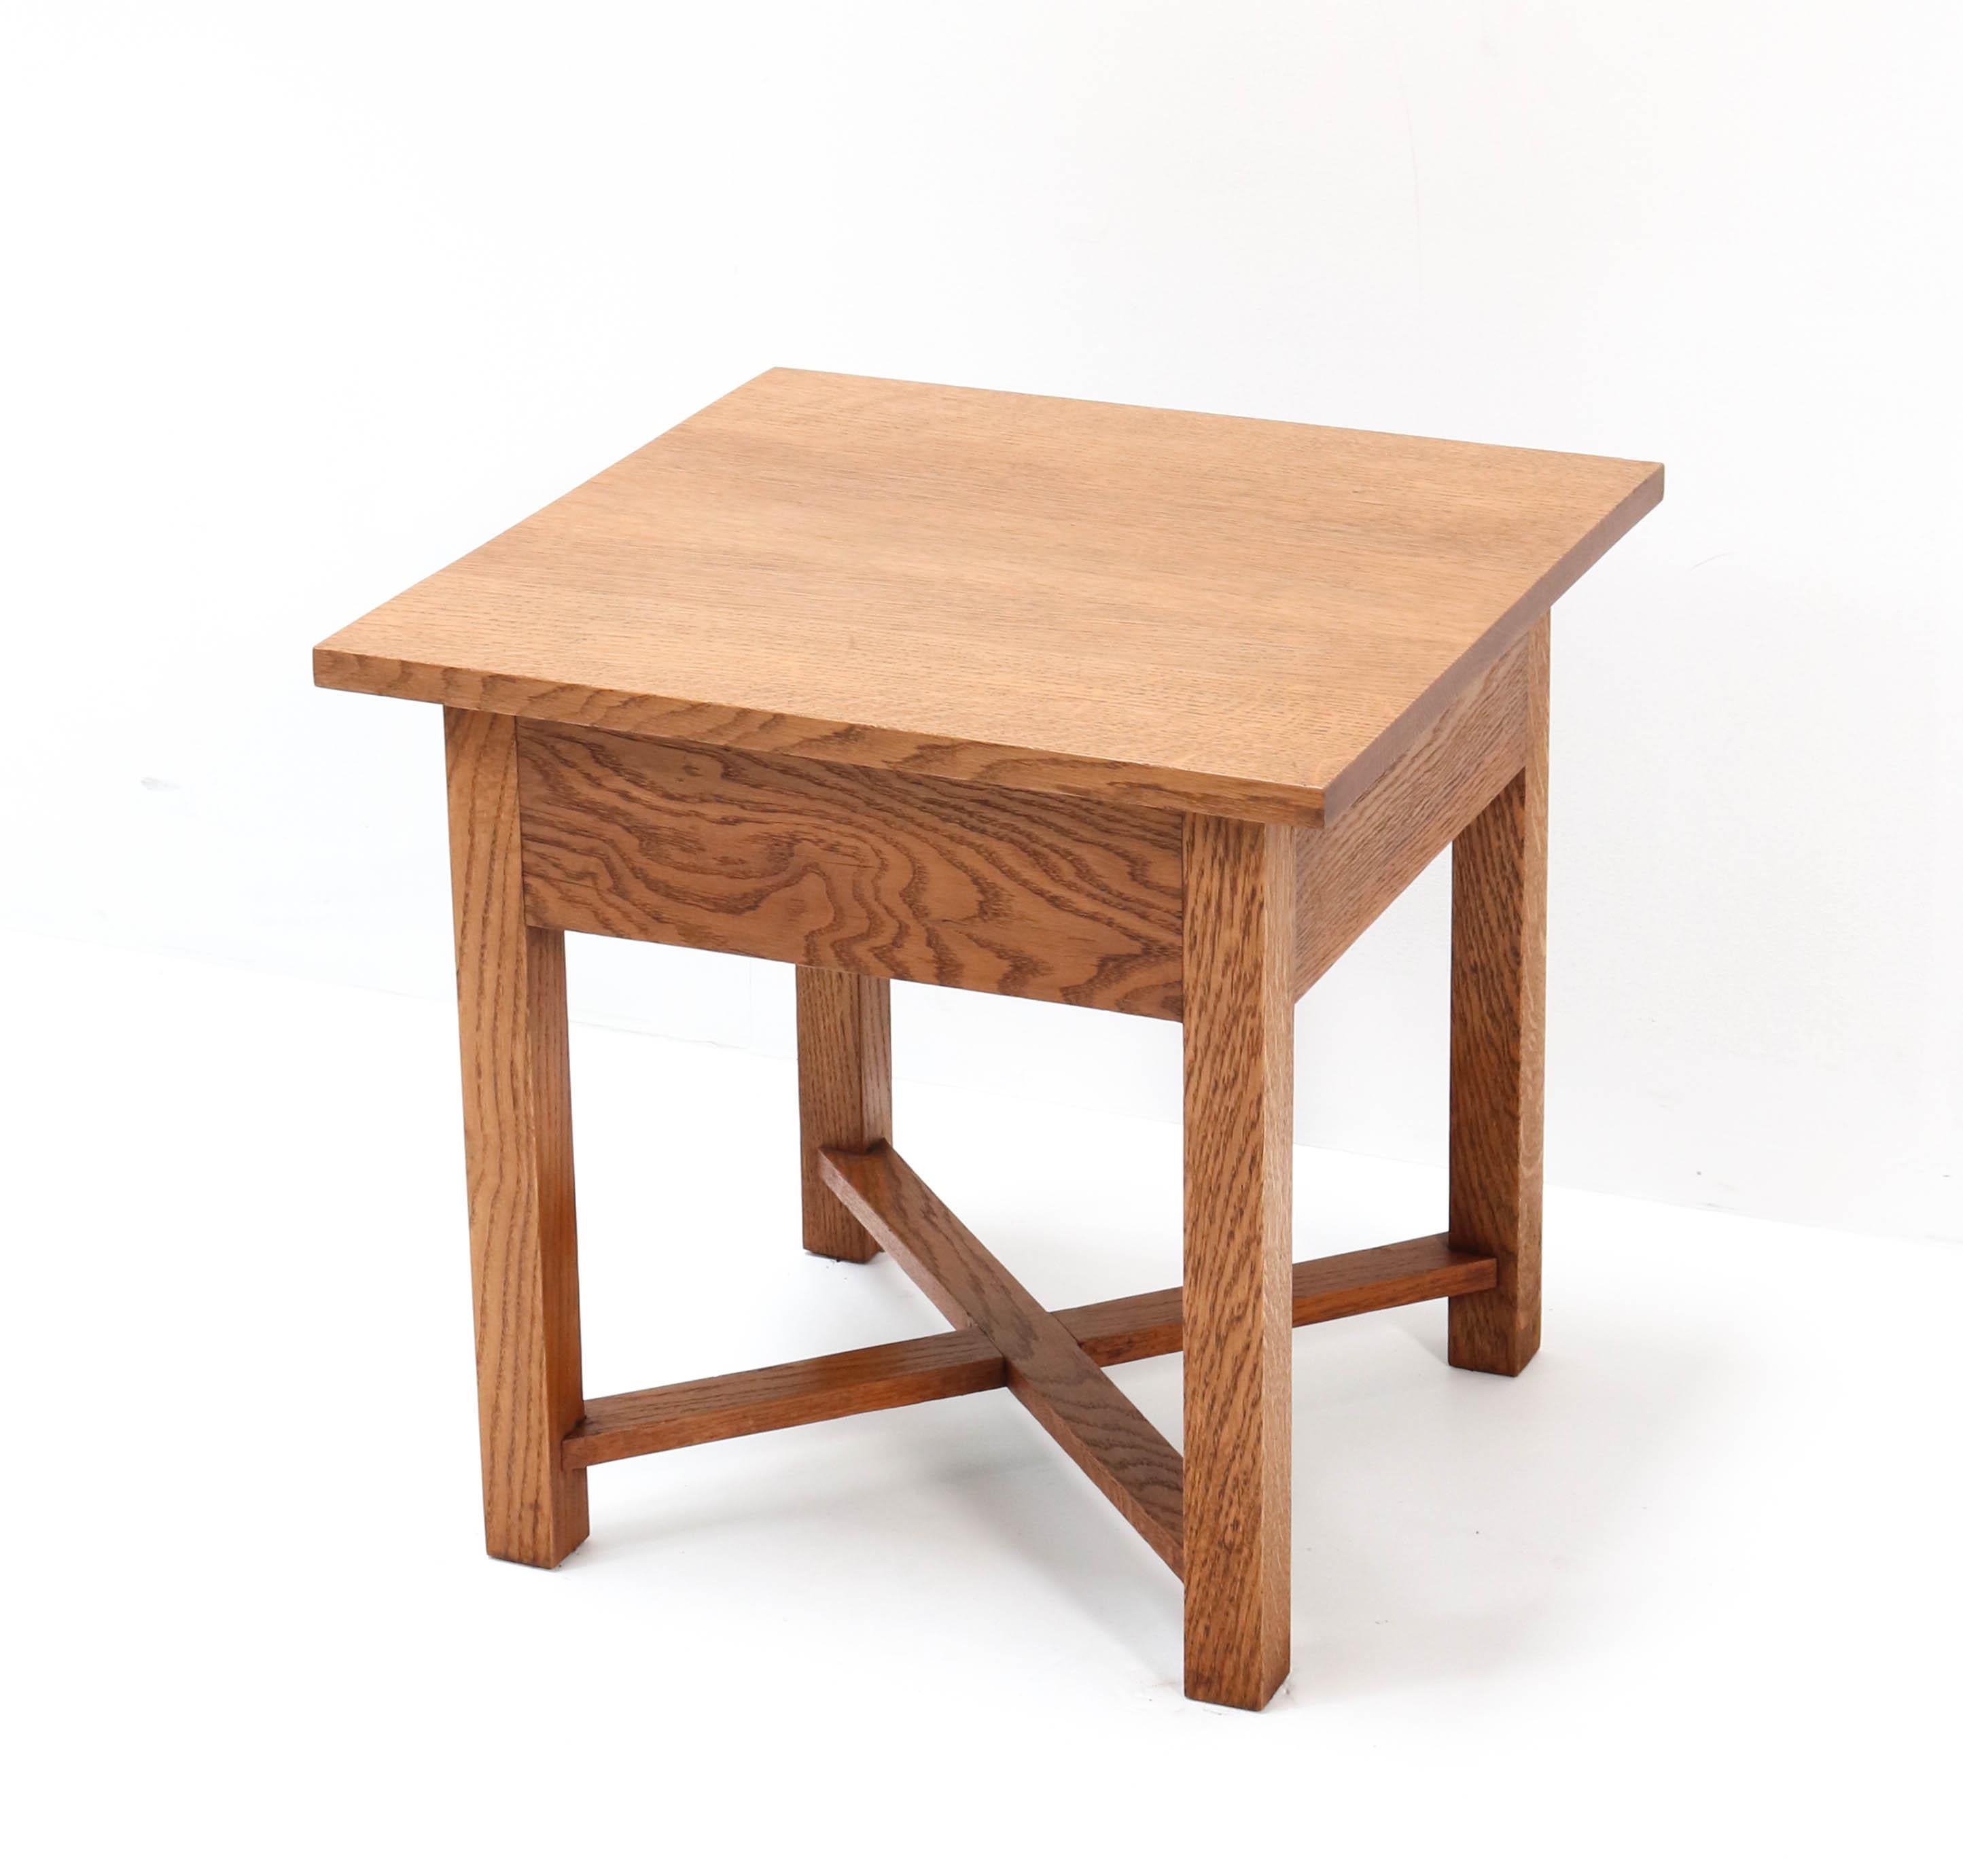 Dutch Solid Oak Art Deco Haagse School Side Table by Cor Alons, 1923 For Sale